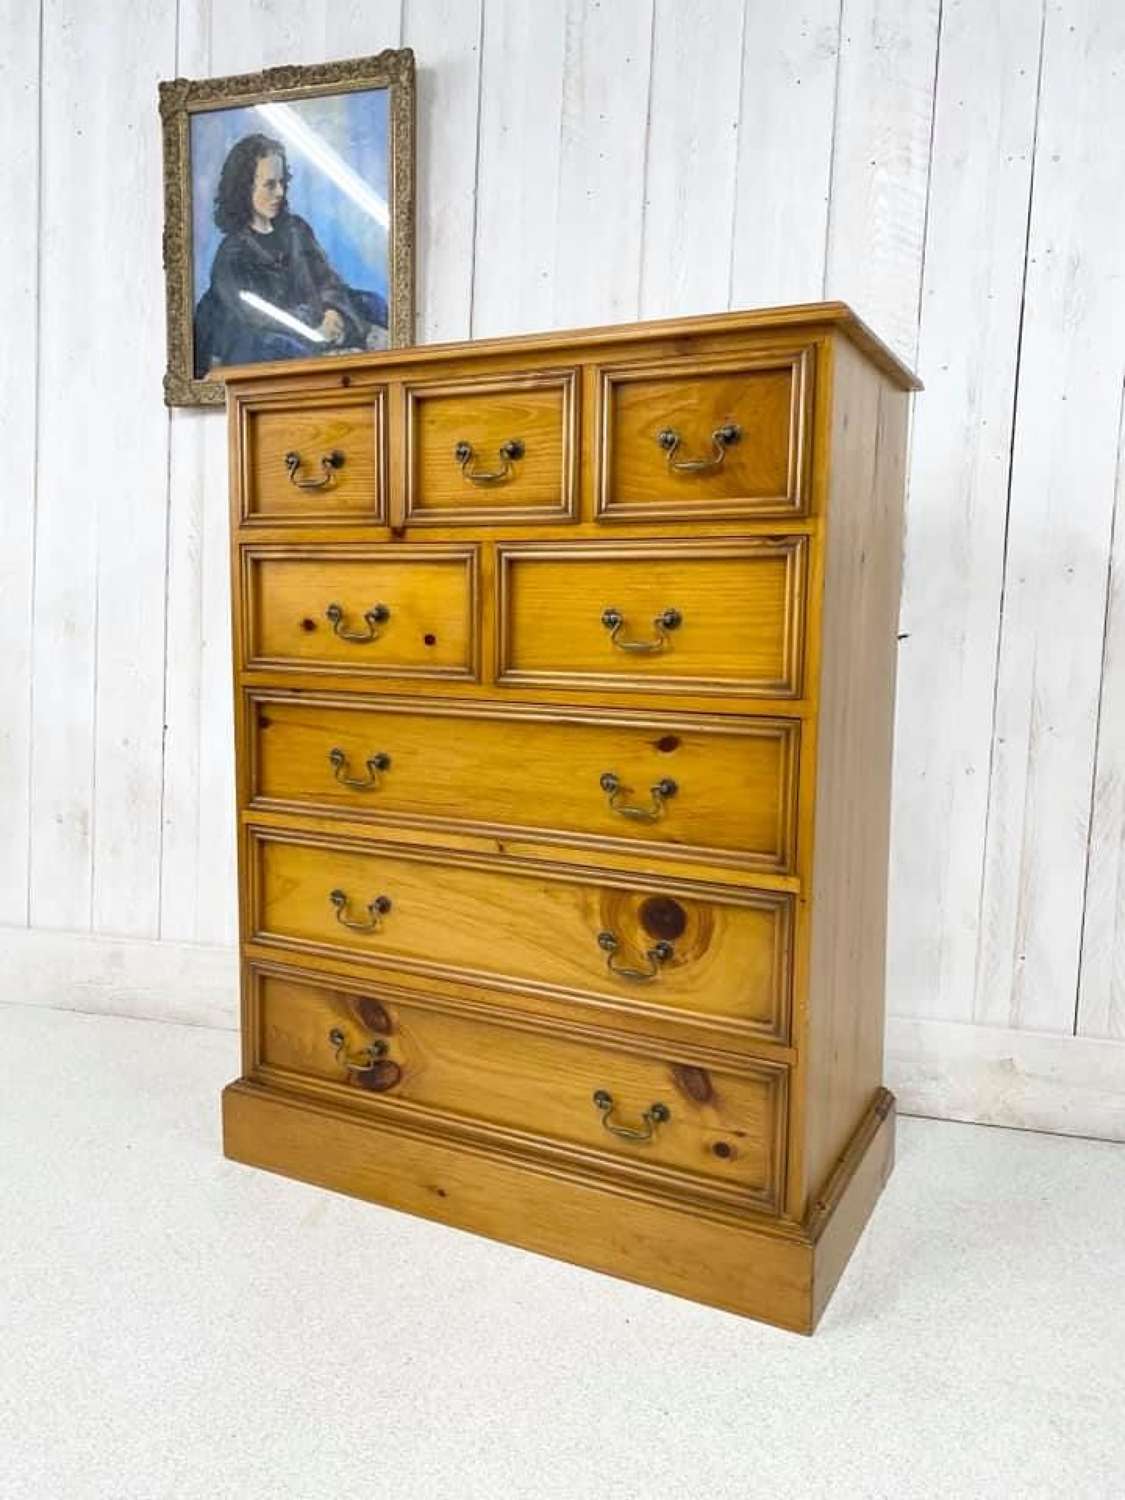 Large Pine Chest of Drawers